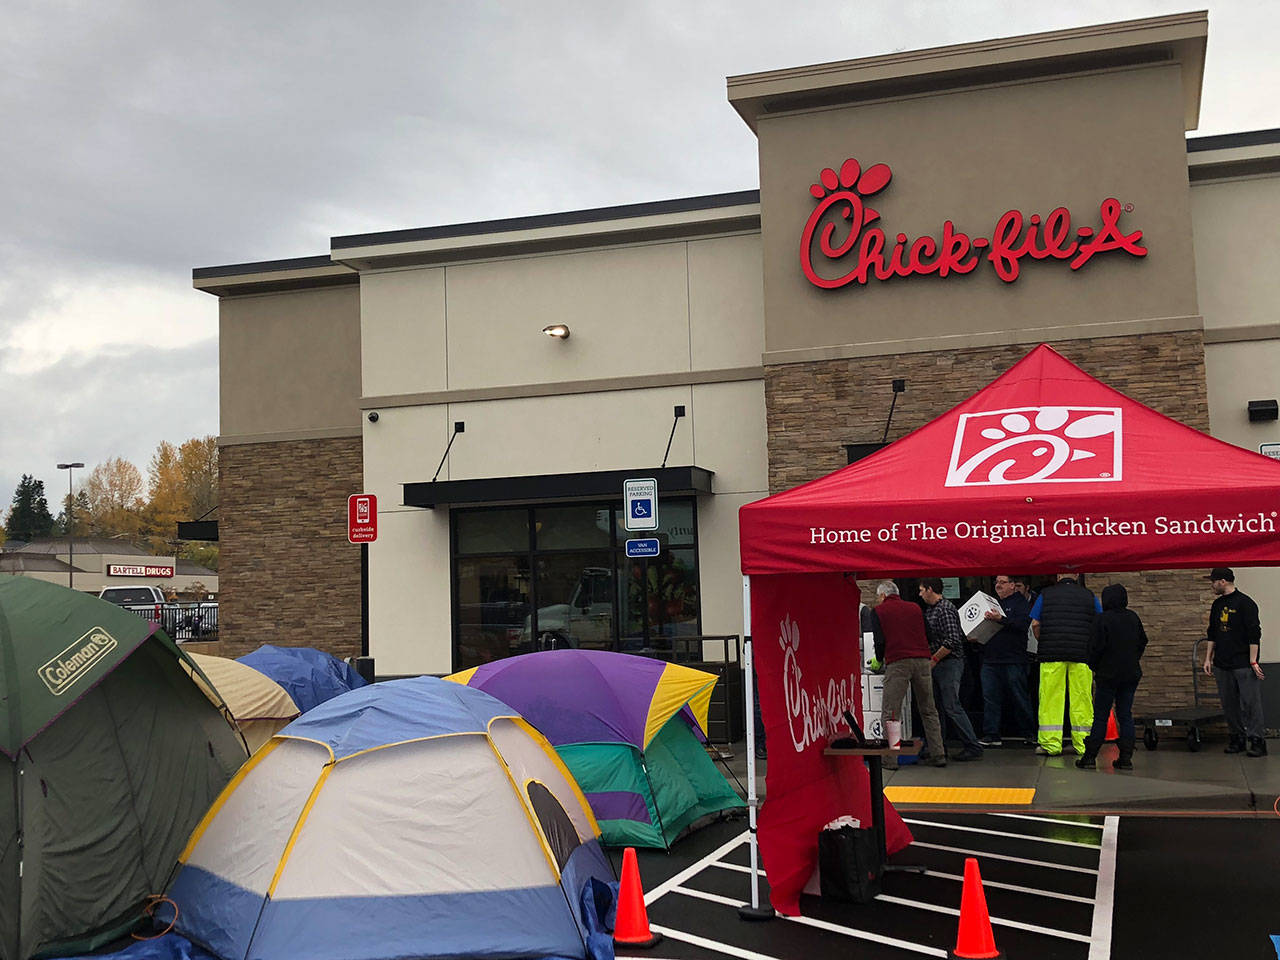 Campers line up outside of the Chick-fil-A at Bothell Canyon in Bothell on Wednesday. They helped pack meals for people in need. (Contributed photo)